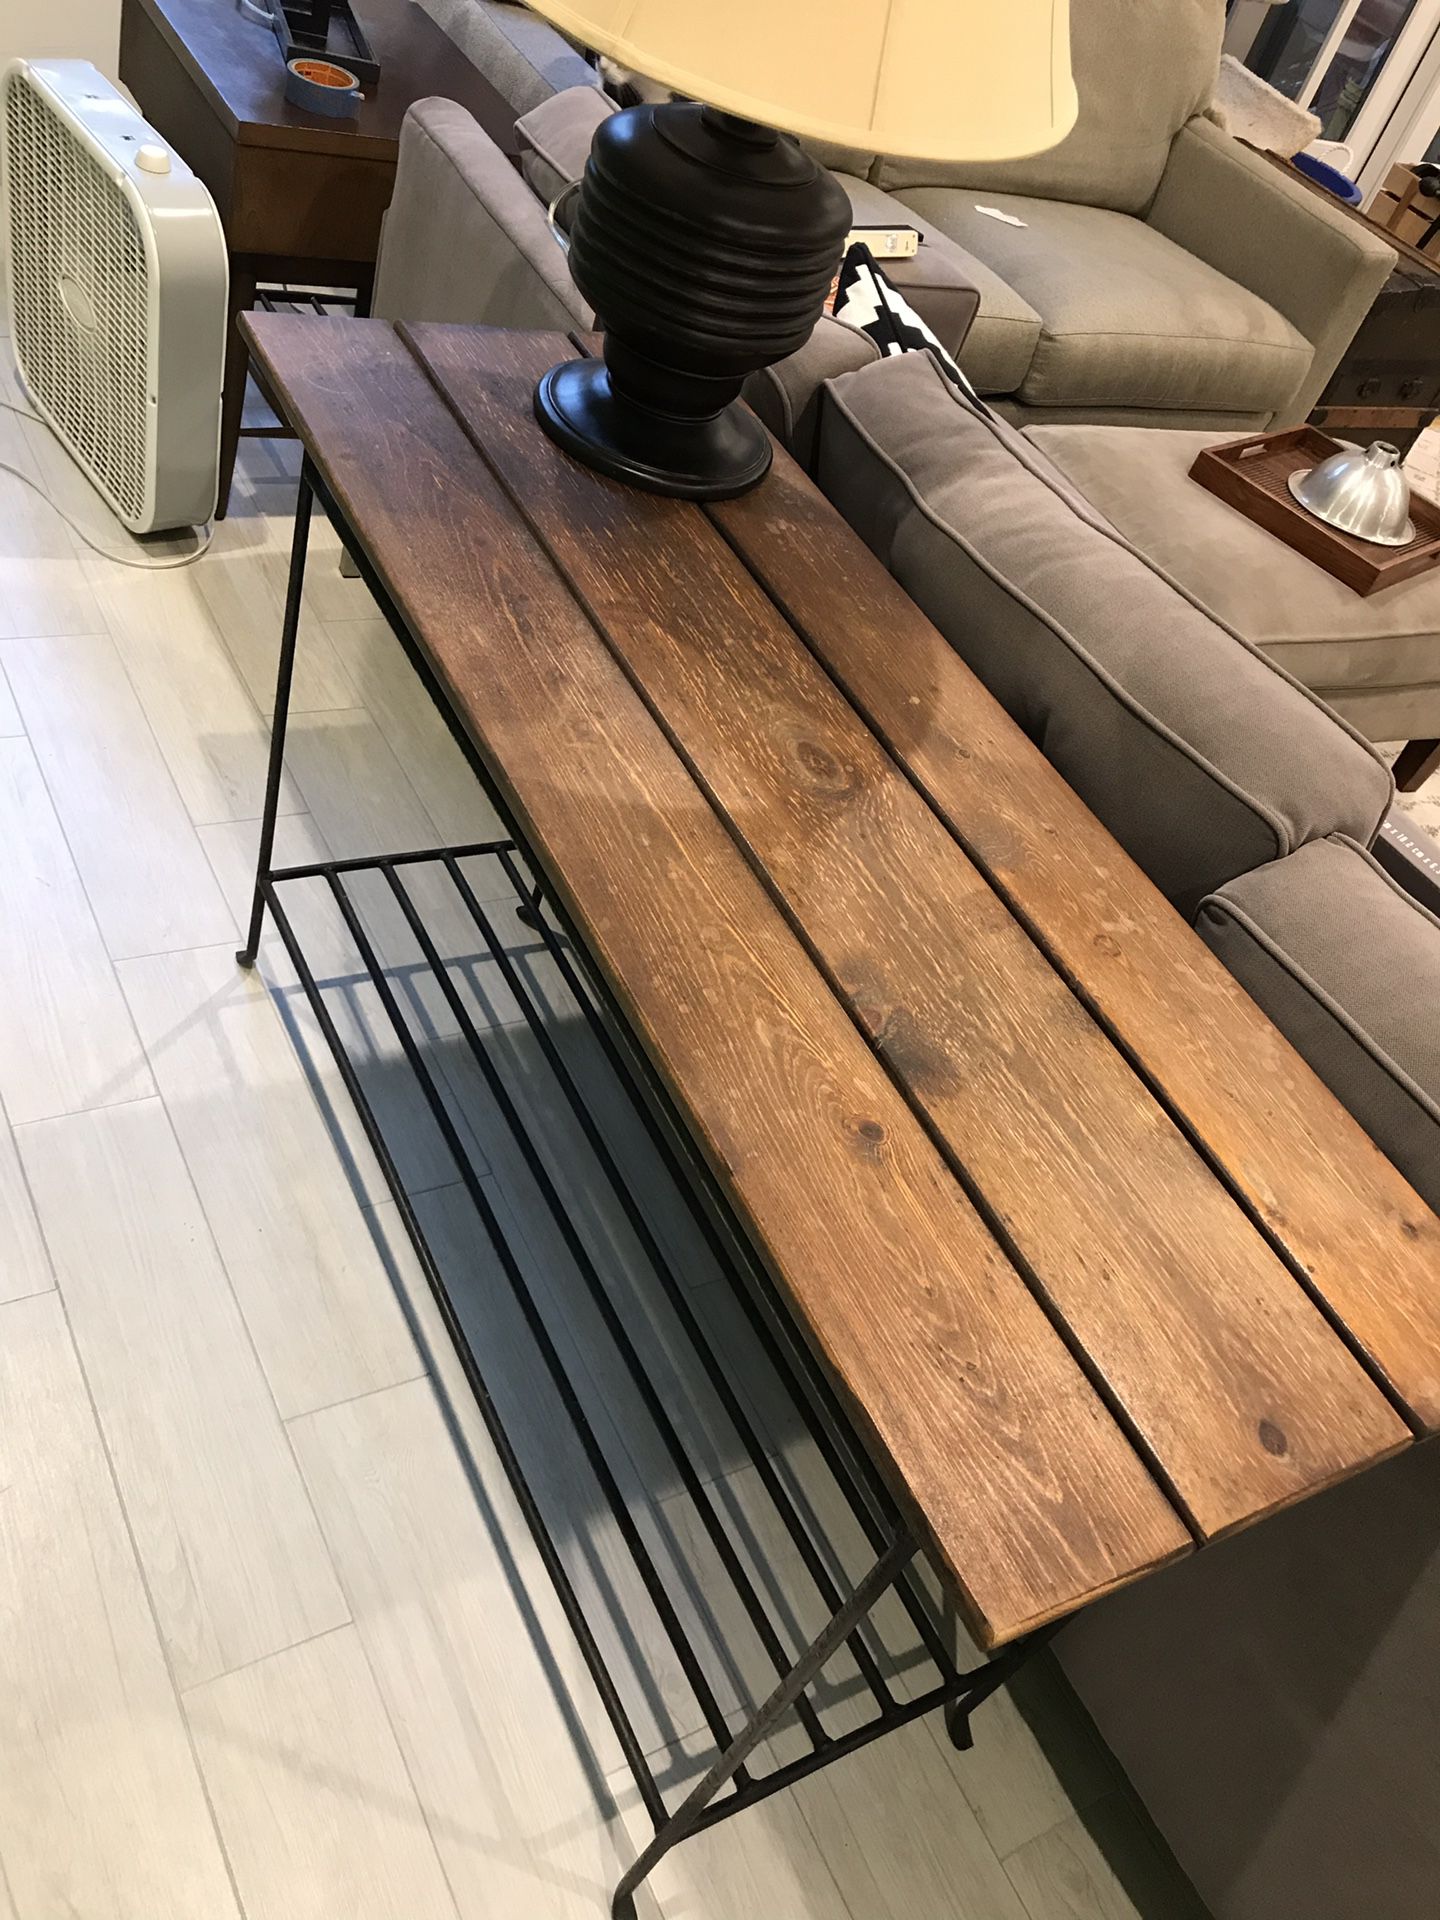 Industrial/farmhouse style console or entryway table